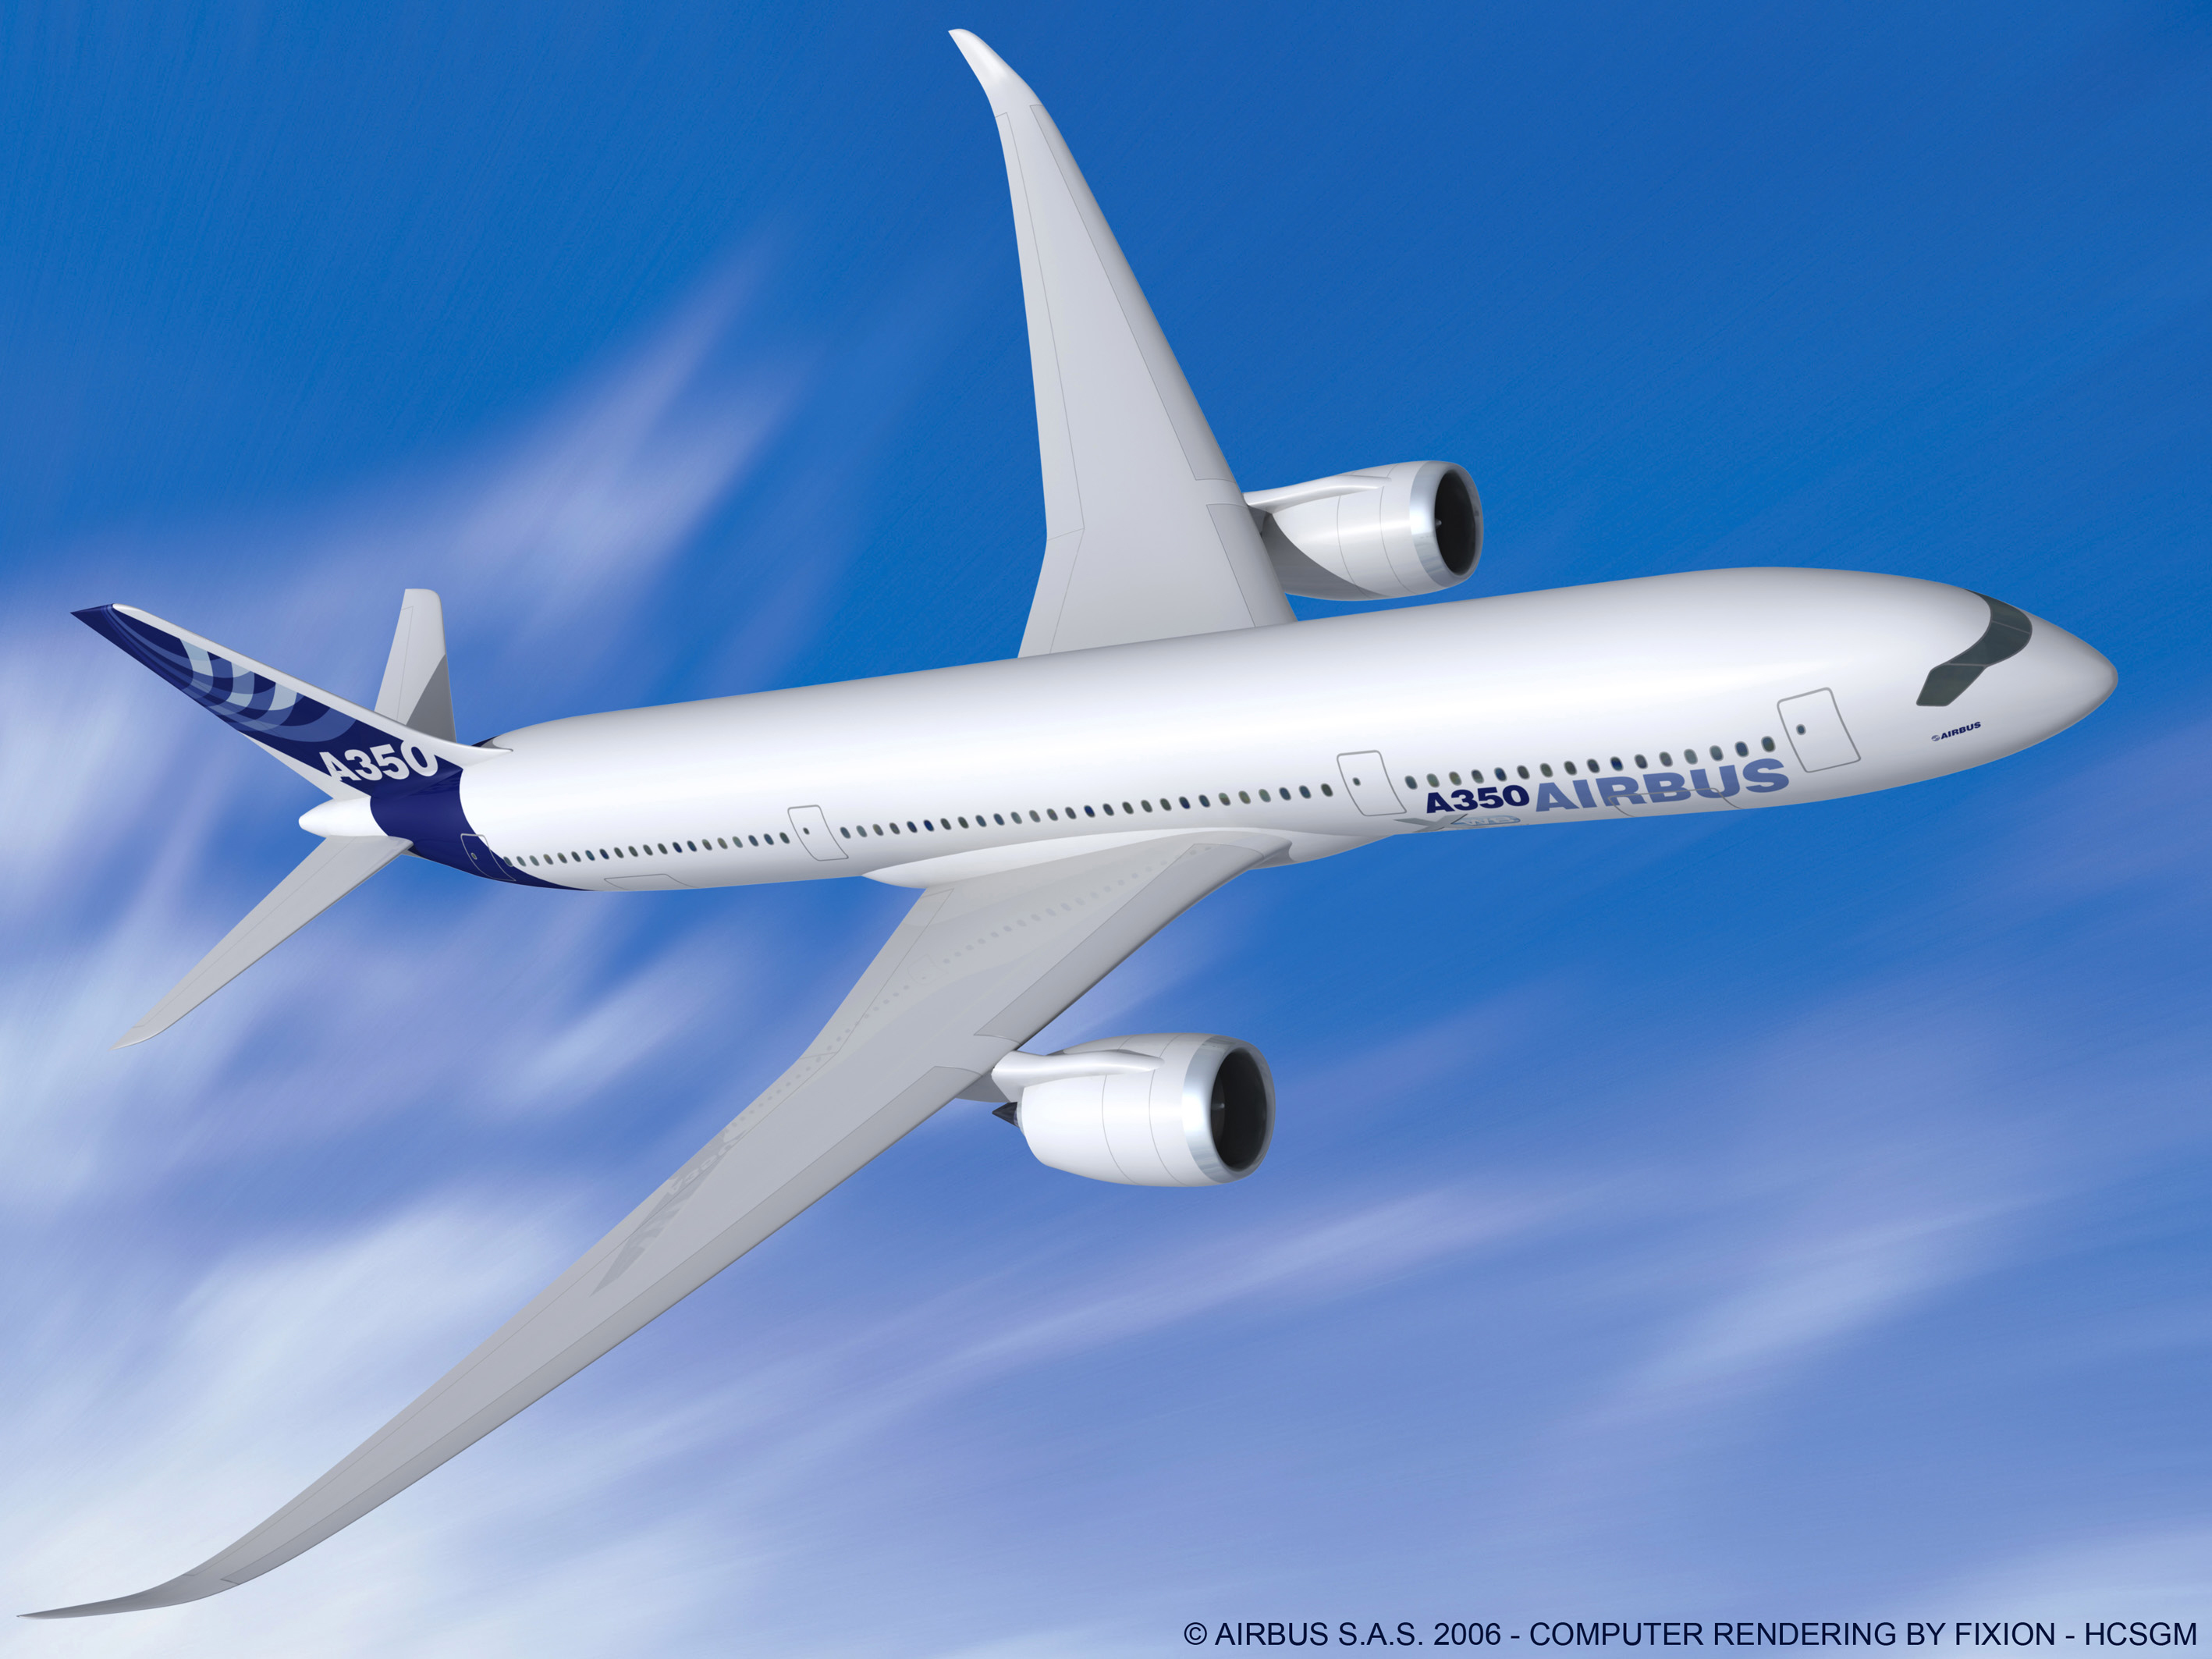 Airline Ticket A350 Xwb Airplane Passenger Jets Airbus Families